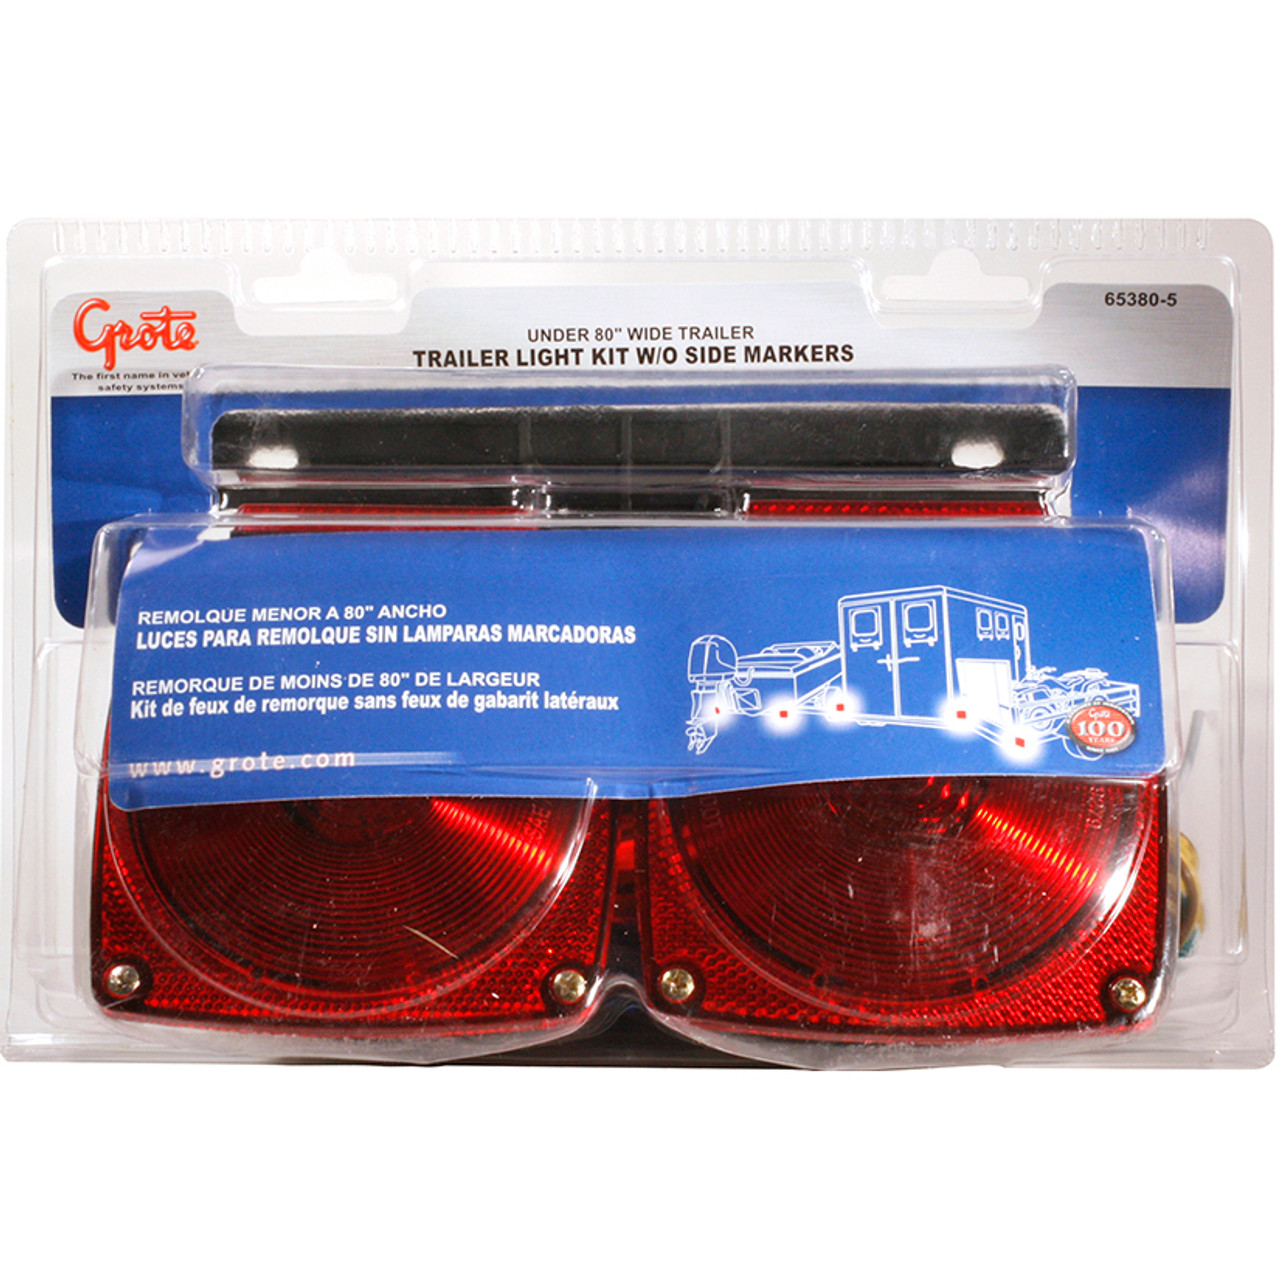 Trailer Lighting Kit w/o Clearance/Marker - Retail - Red  65380-5